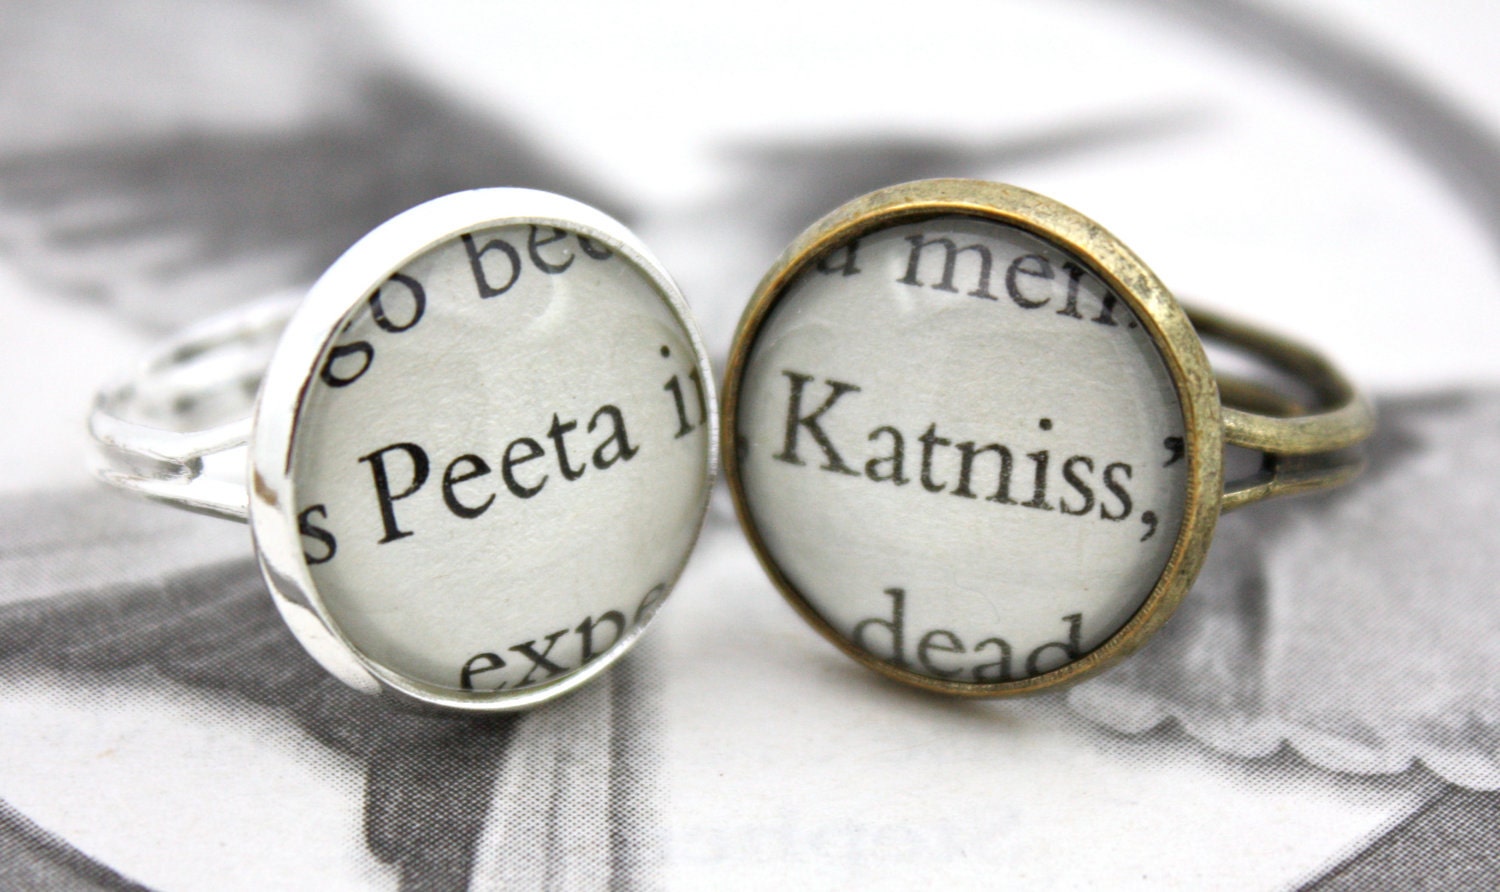 Hunger Games Ring in Silver or Antique Bronze - Lots to choose from